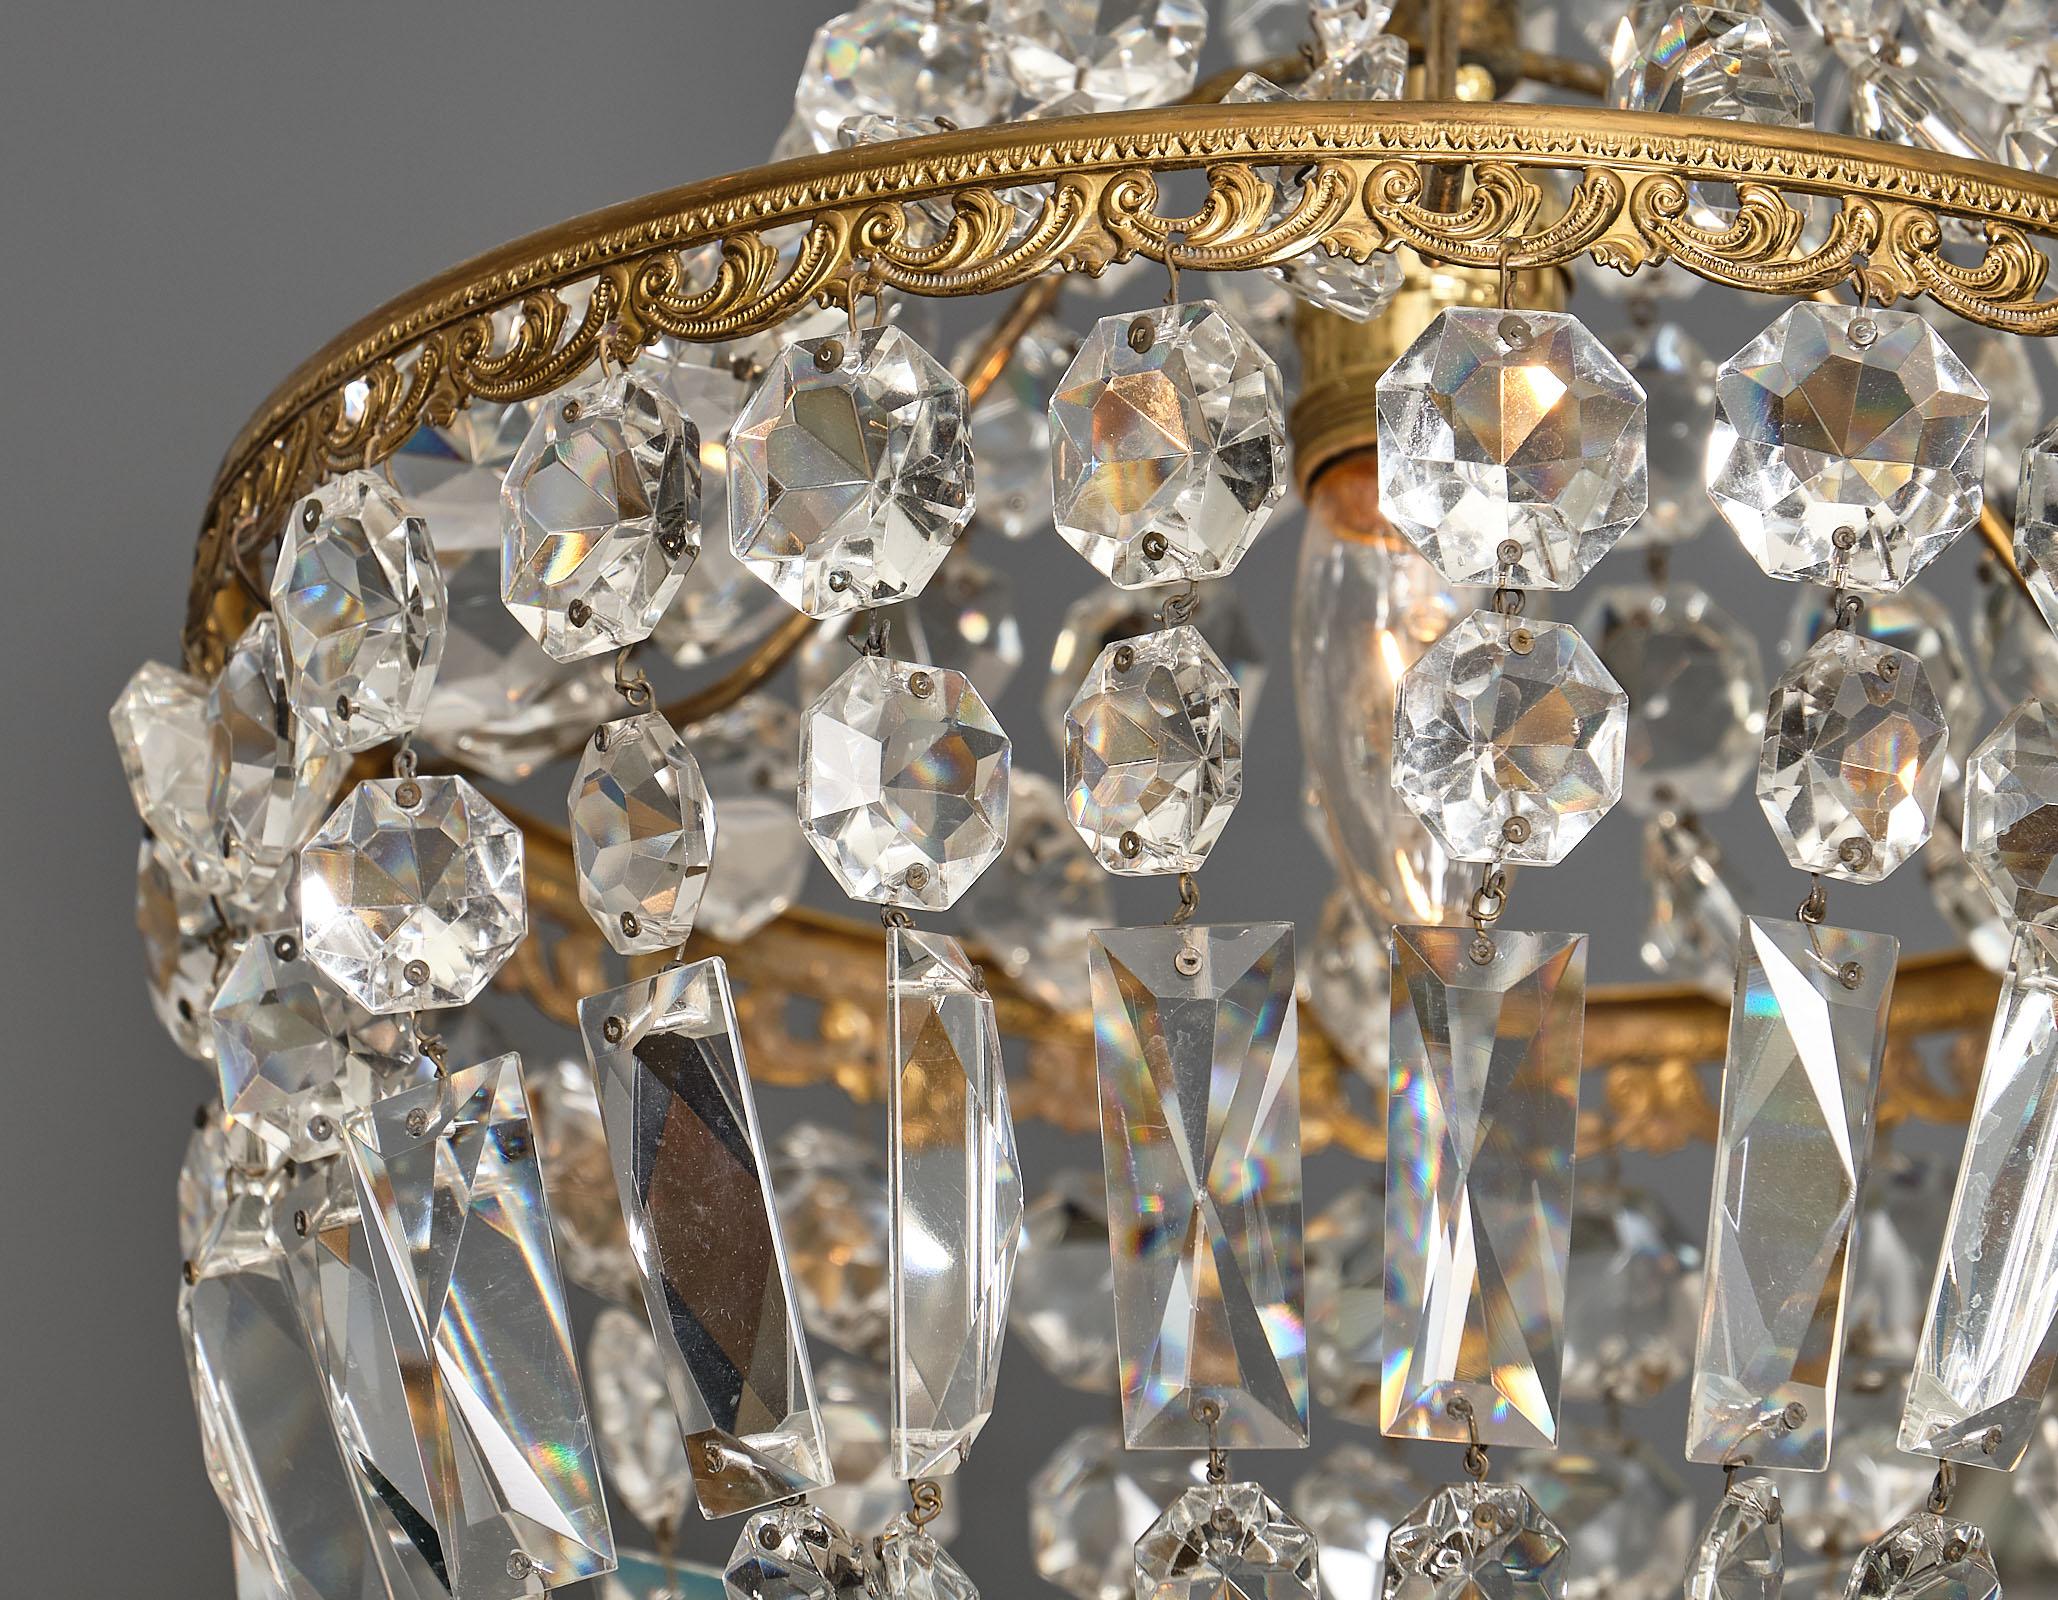 Early 20th Century Empire Style French Crystal Chandelier